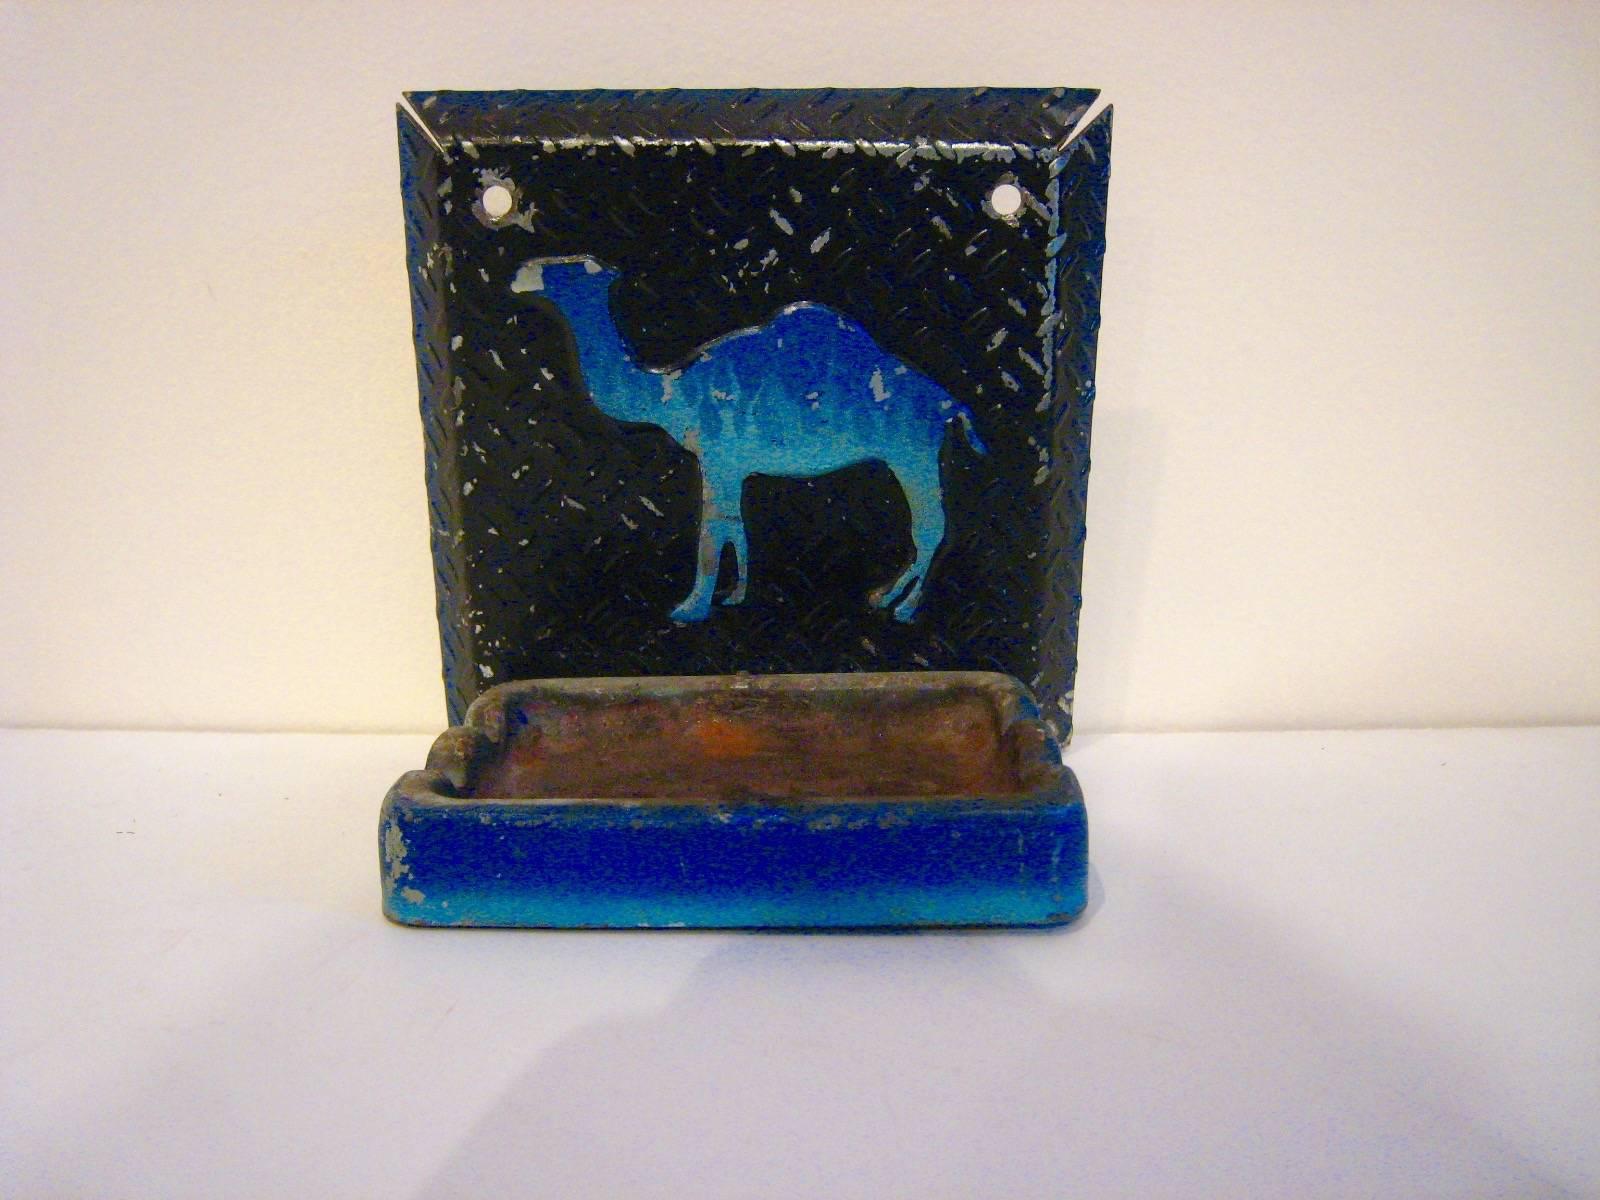 A striking wall-mounted metal and ceramic ashtray with beautiful image of the Camel Cigarette logo. Ashtray is easily affixed to the wall with two screws and the ashtray flips over to empty. Unusual piece.